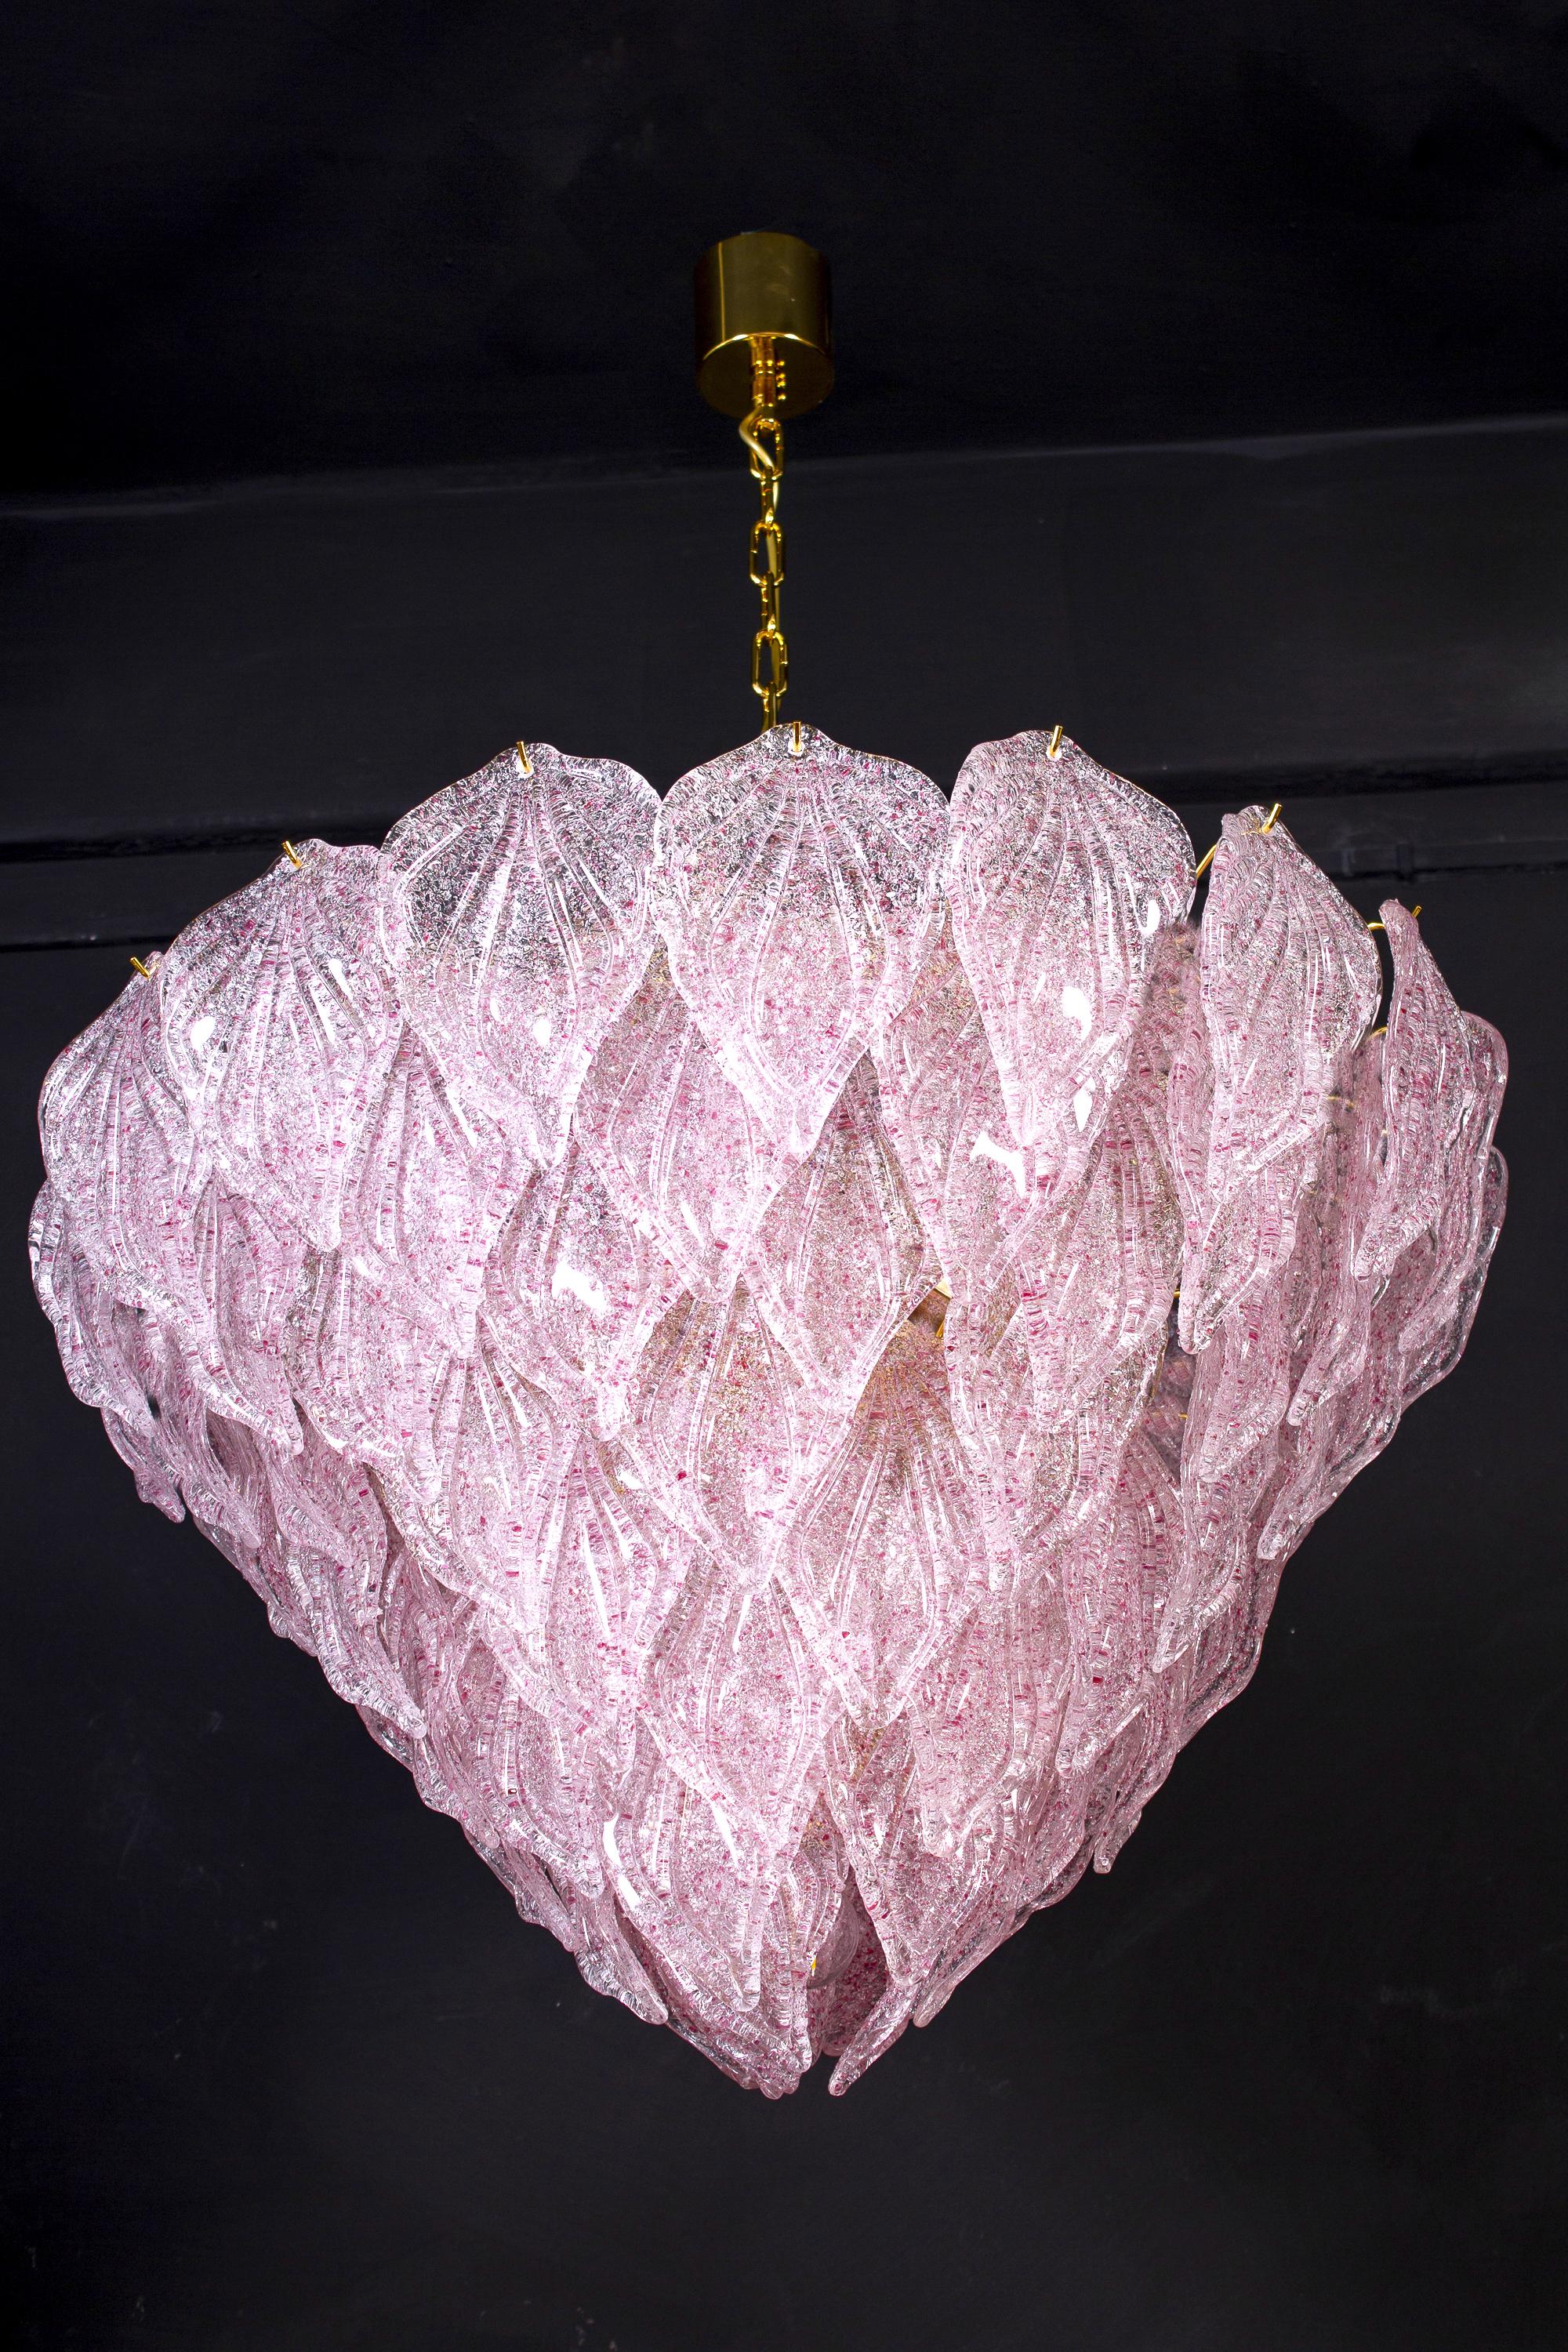 Large Pink Murano Glass Chandeliers Italian Modern, 1970s For Sale 5